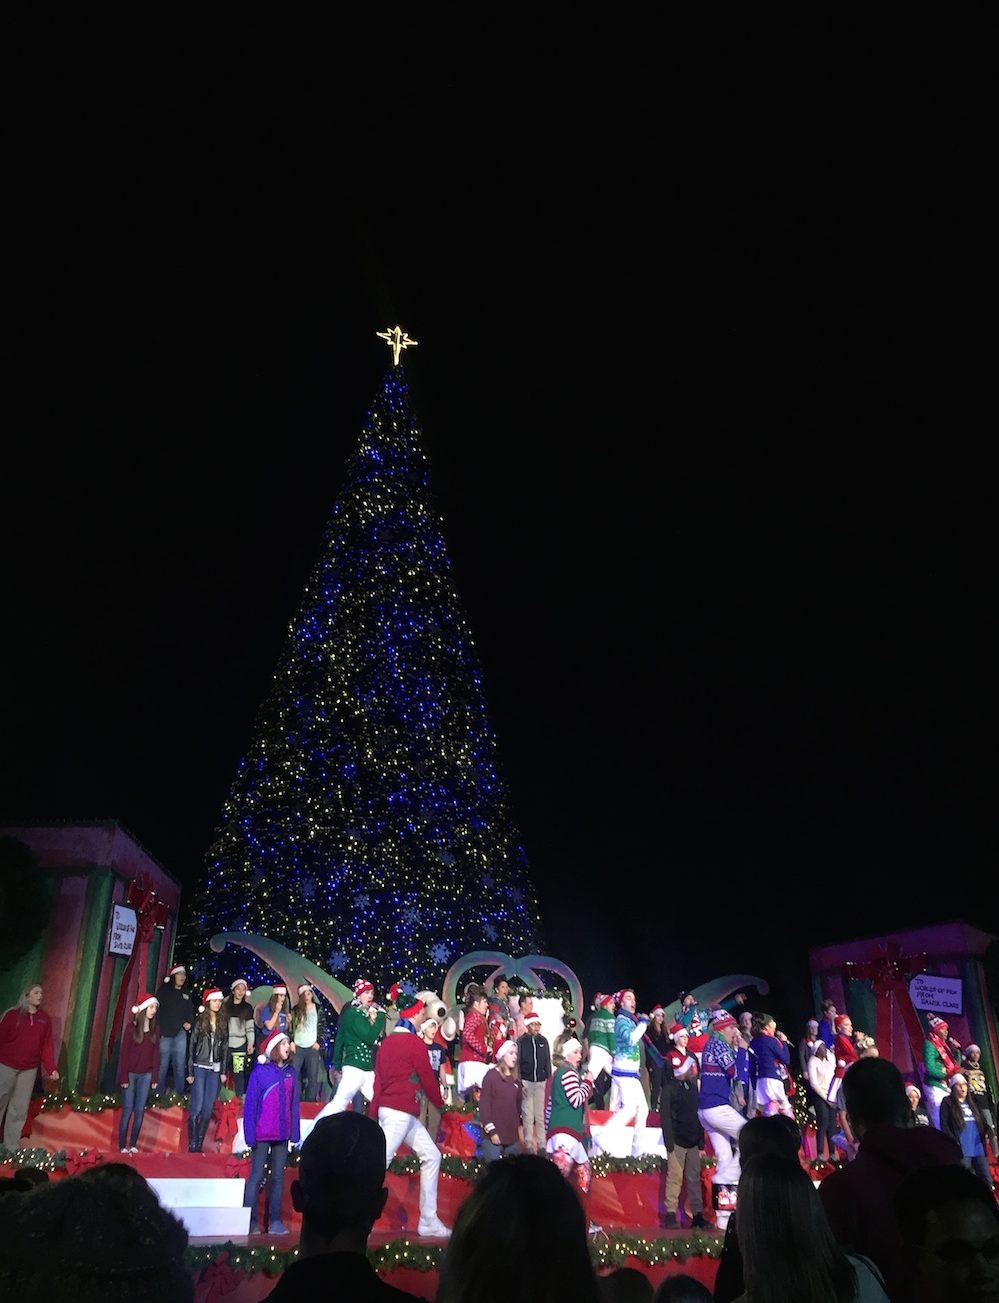 Official tree lighting ceremony at Worlds of Fun's WinterFest in Kansas City, Missouri